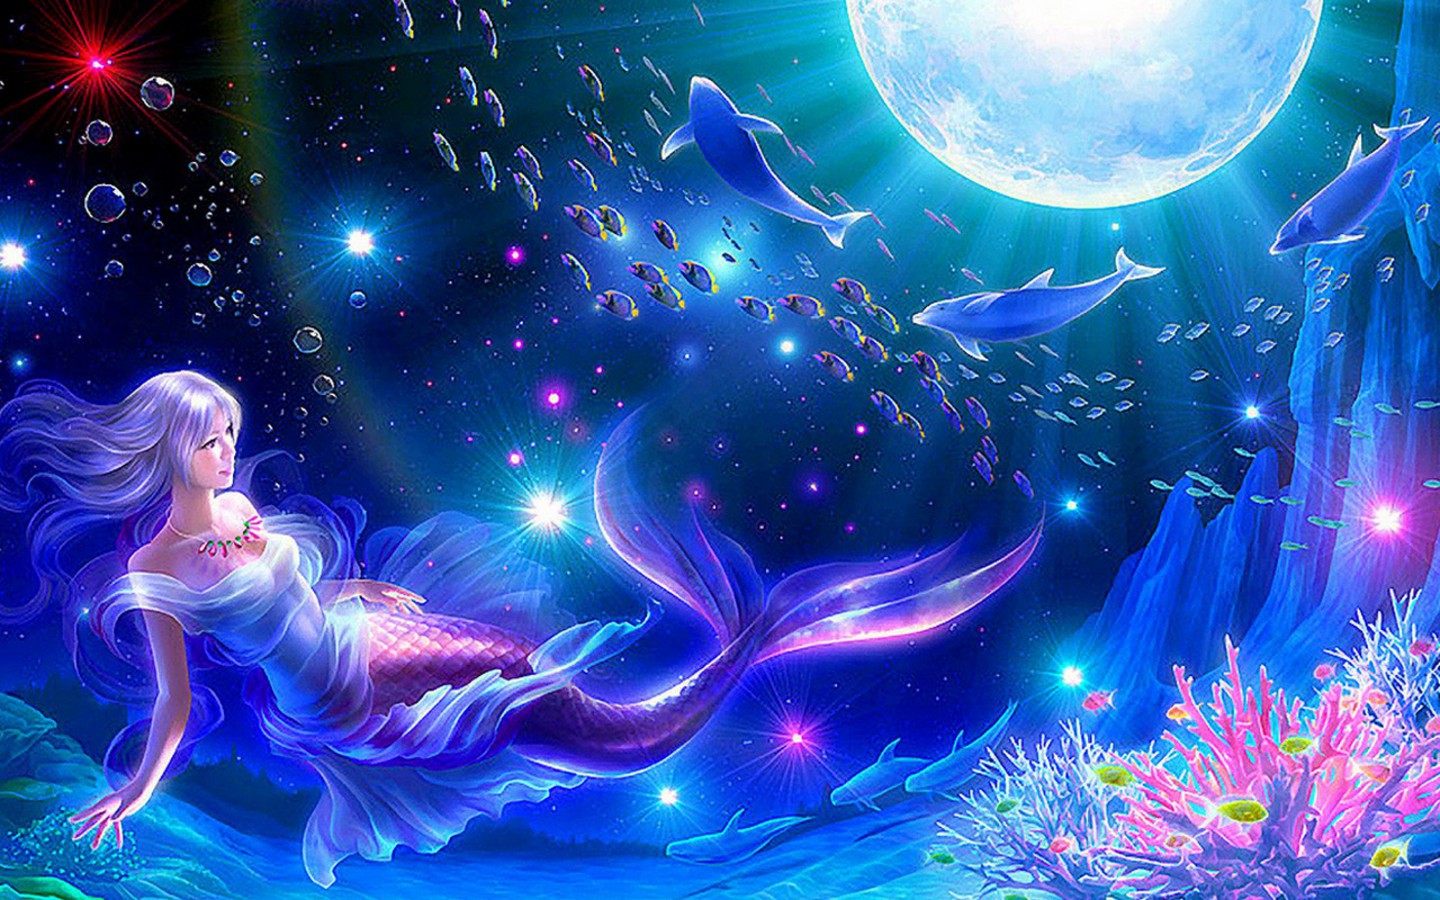  wallpapers women beauty photos new collection of fantasy wallpapers 1440x900